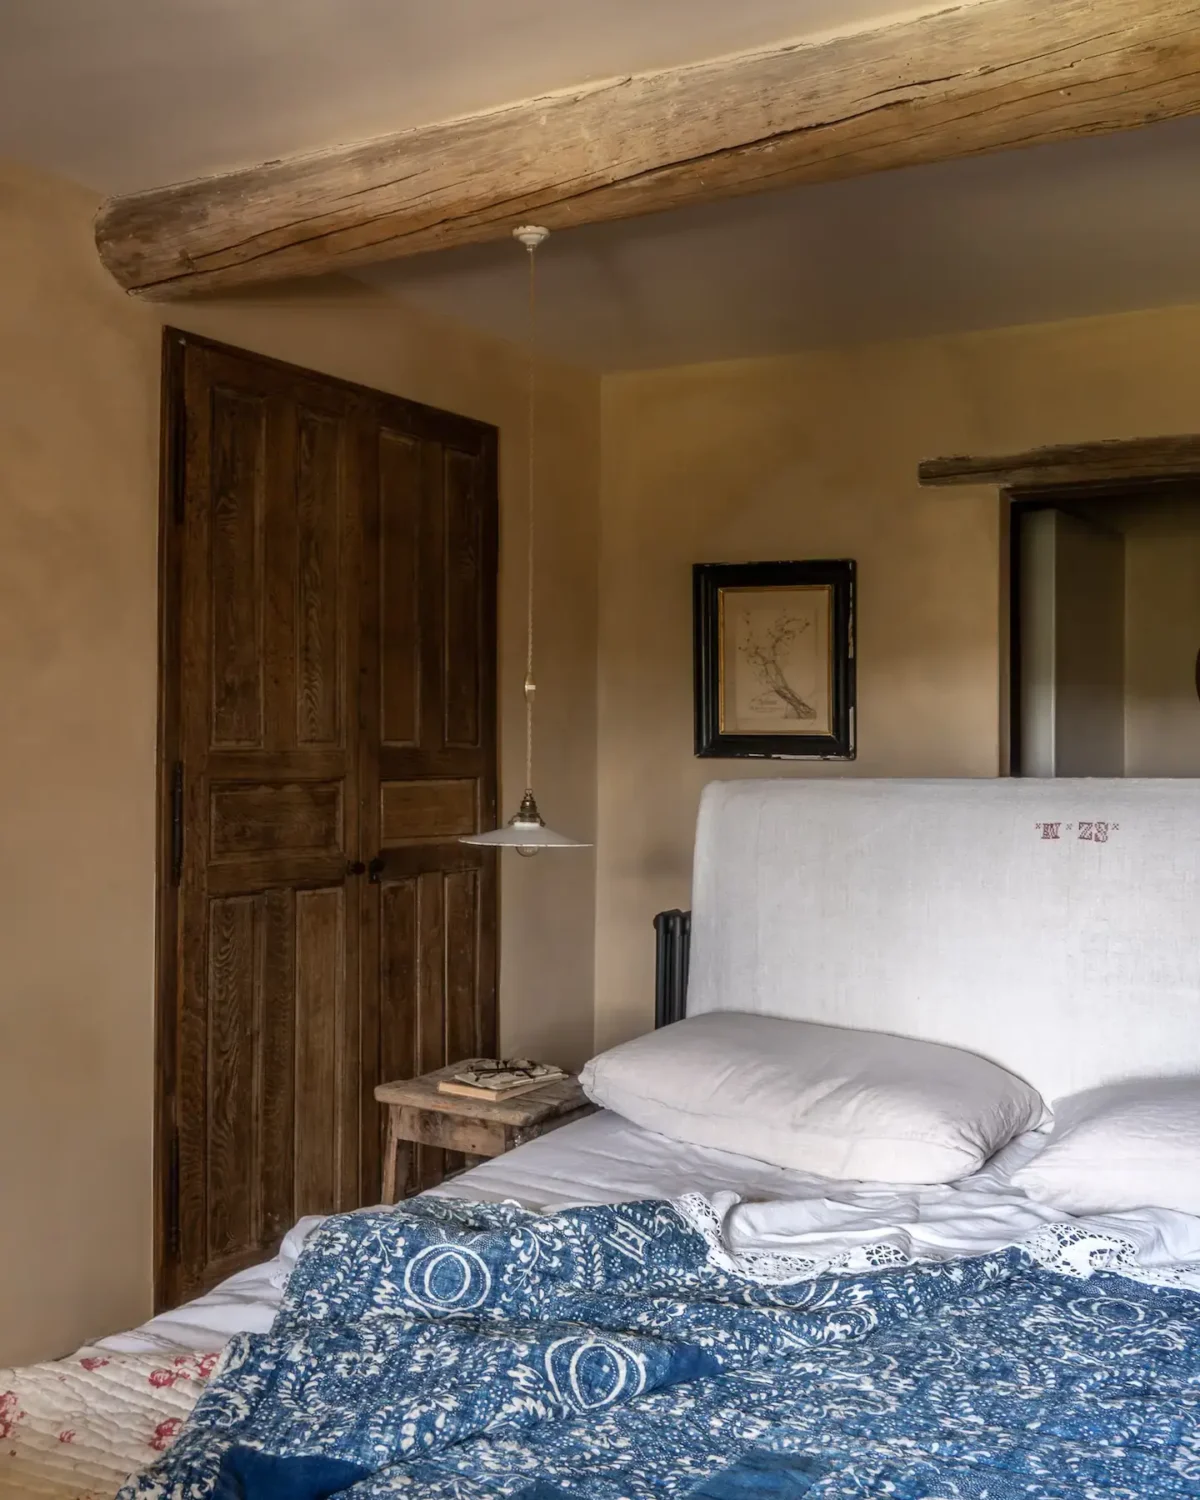 bedroom-exposed-wooden-ceiling-beam-country-house-france-nordroom